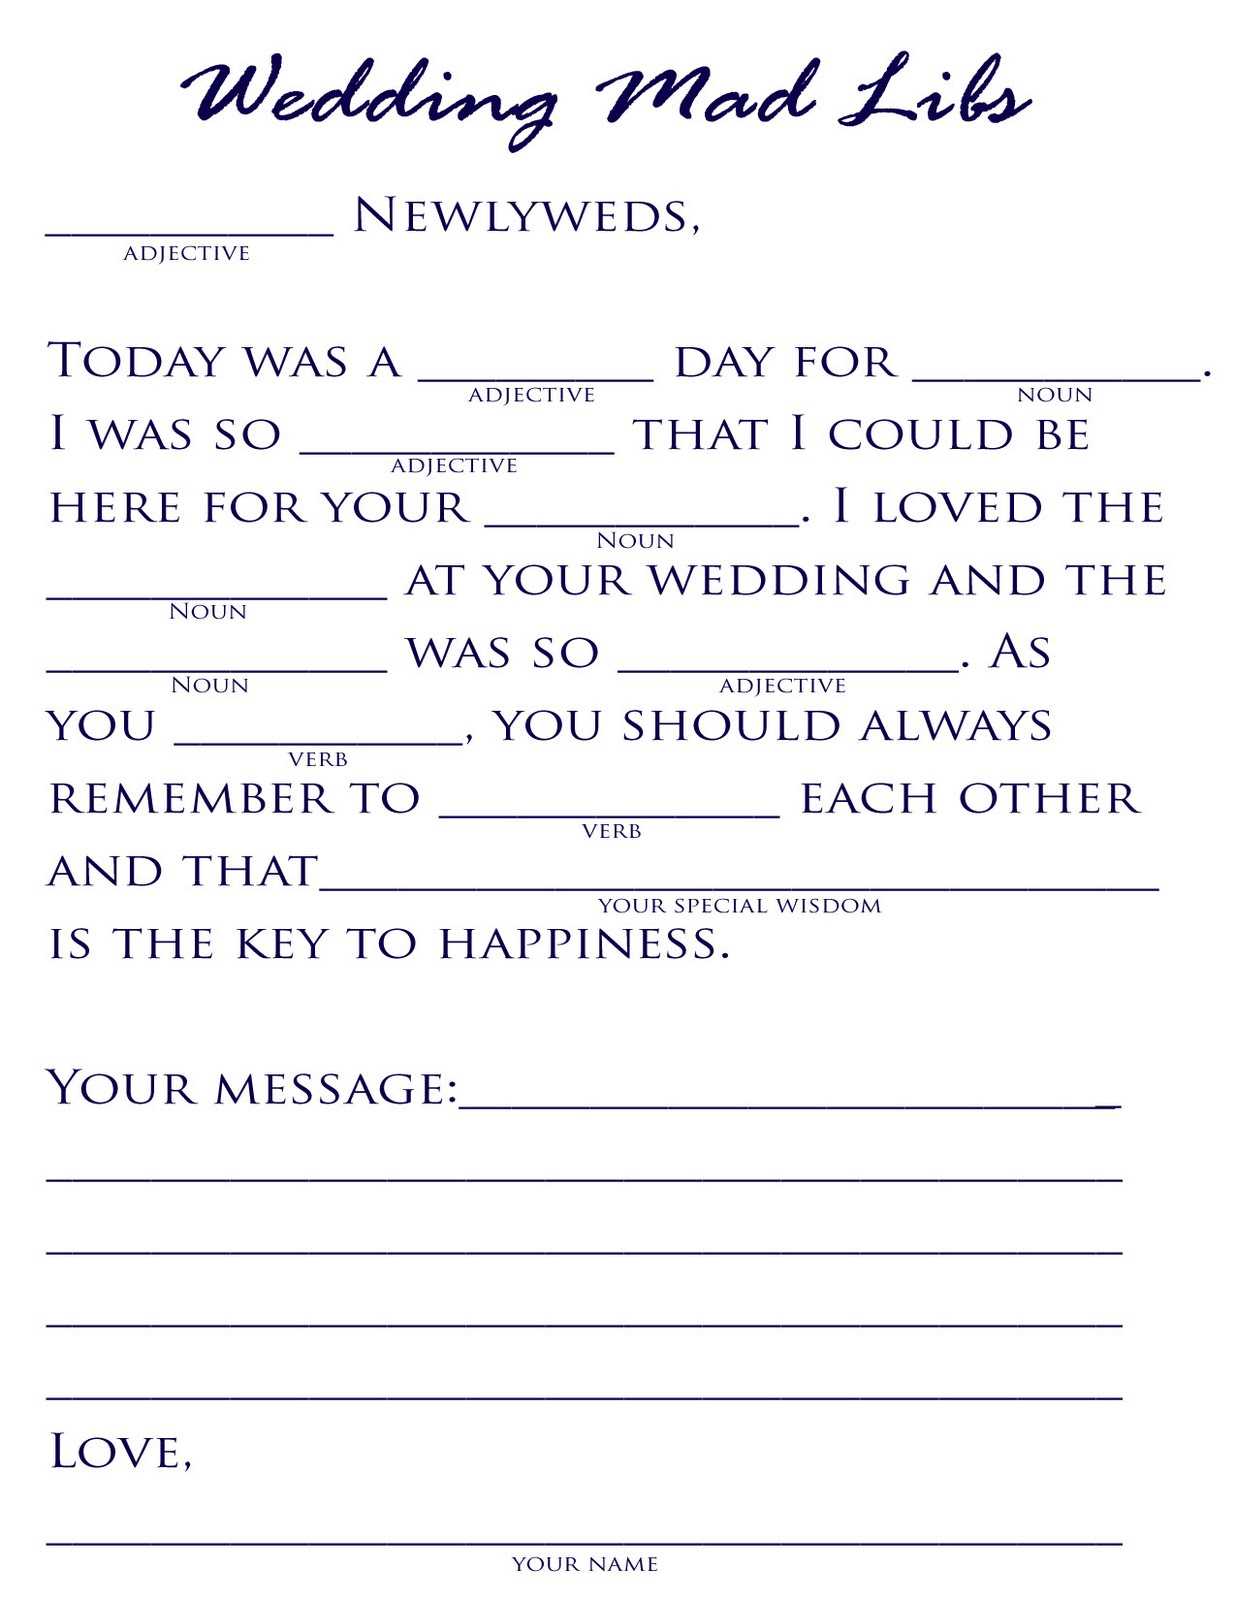 18 Fun Wedding Mad Libs | Kittybabylove Throughout Marriage Advice Cards Templates